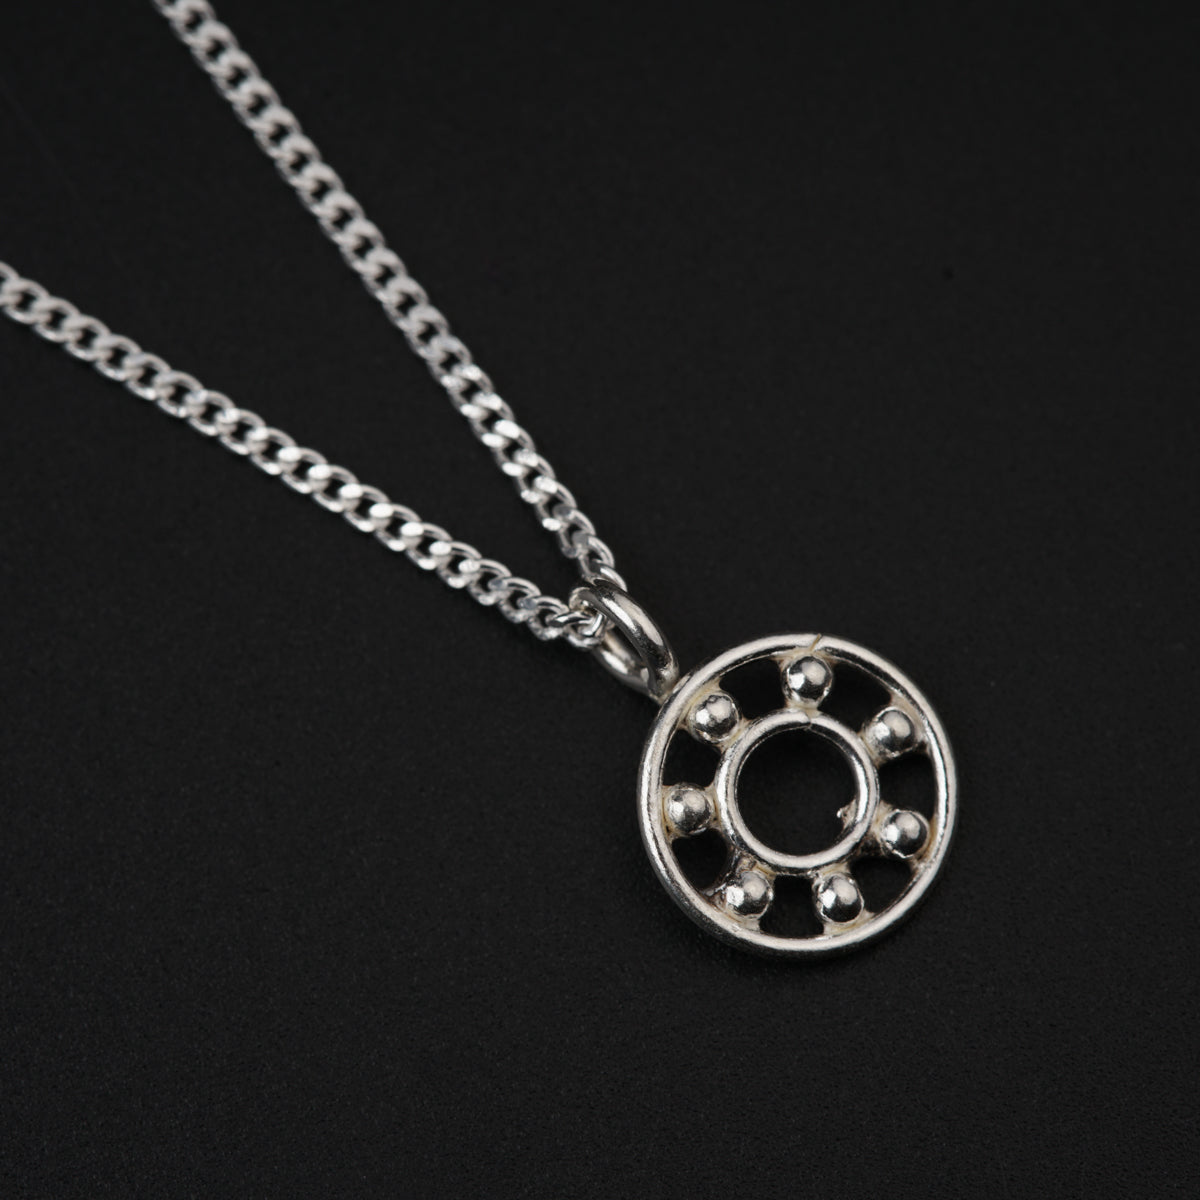 Daily Wear Silver Shiny Round in Round Necklace